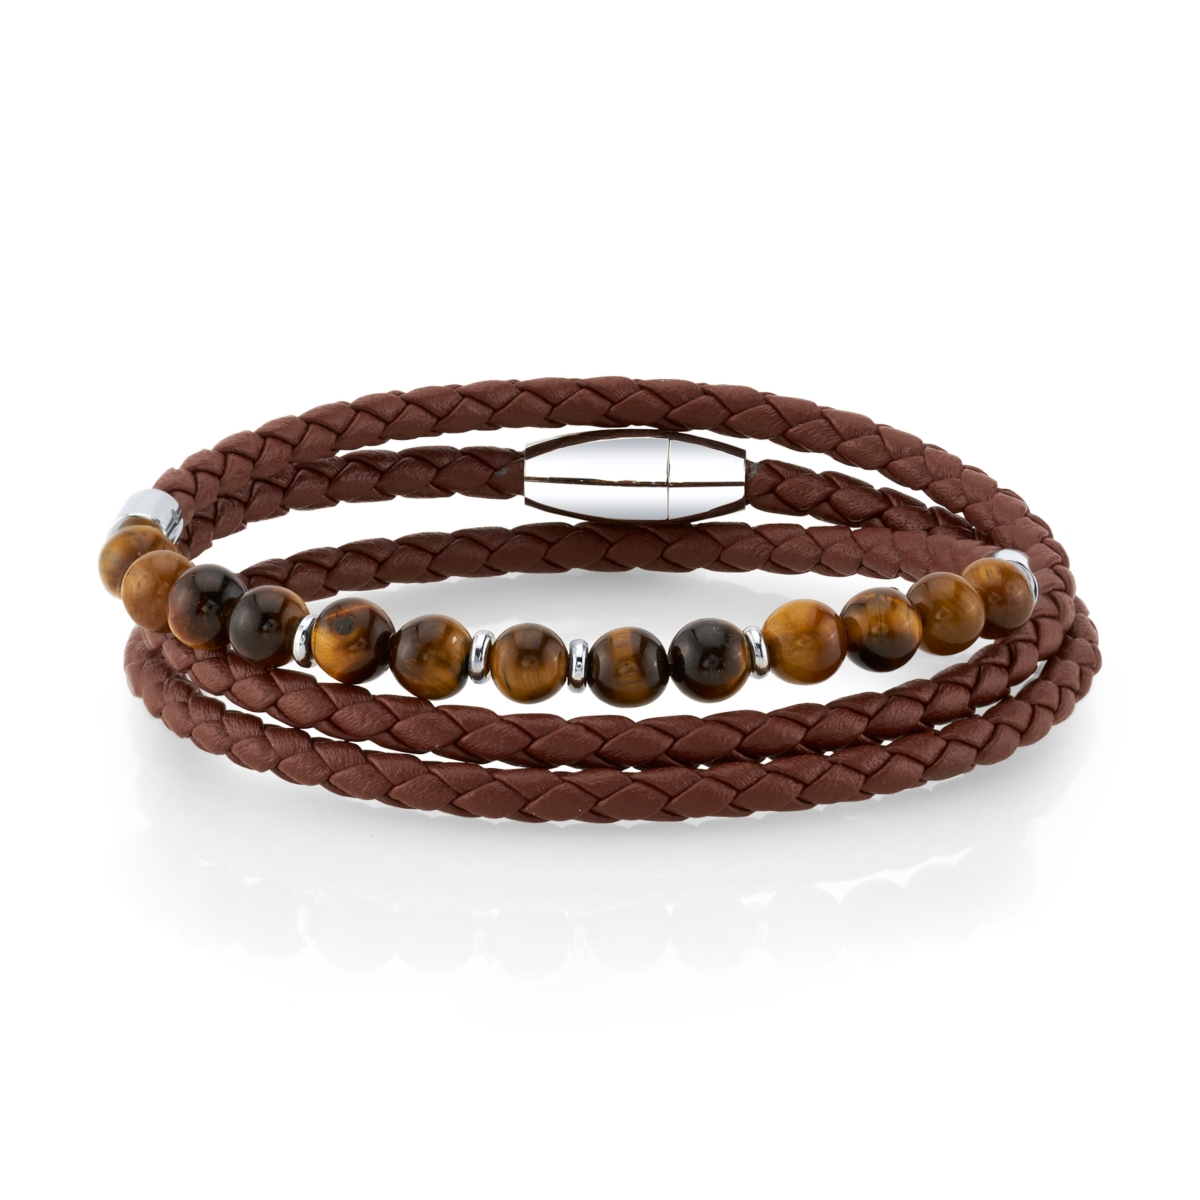 Brown Leather and Tiger Eye Bead Triple Wrap Bracelet with Stainless Steel Clasp, 26" - Brown/Stainless Steel